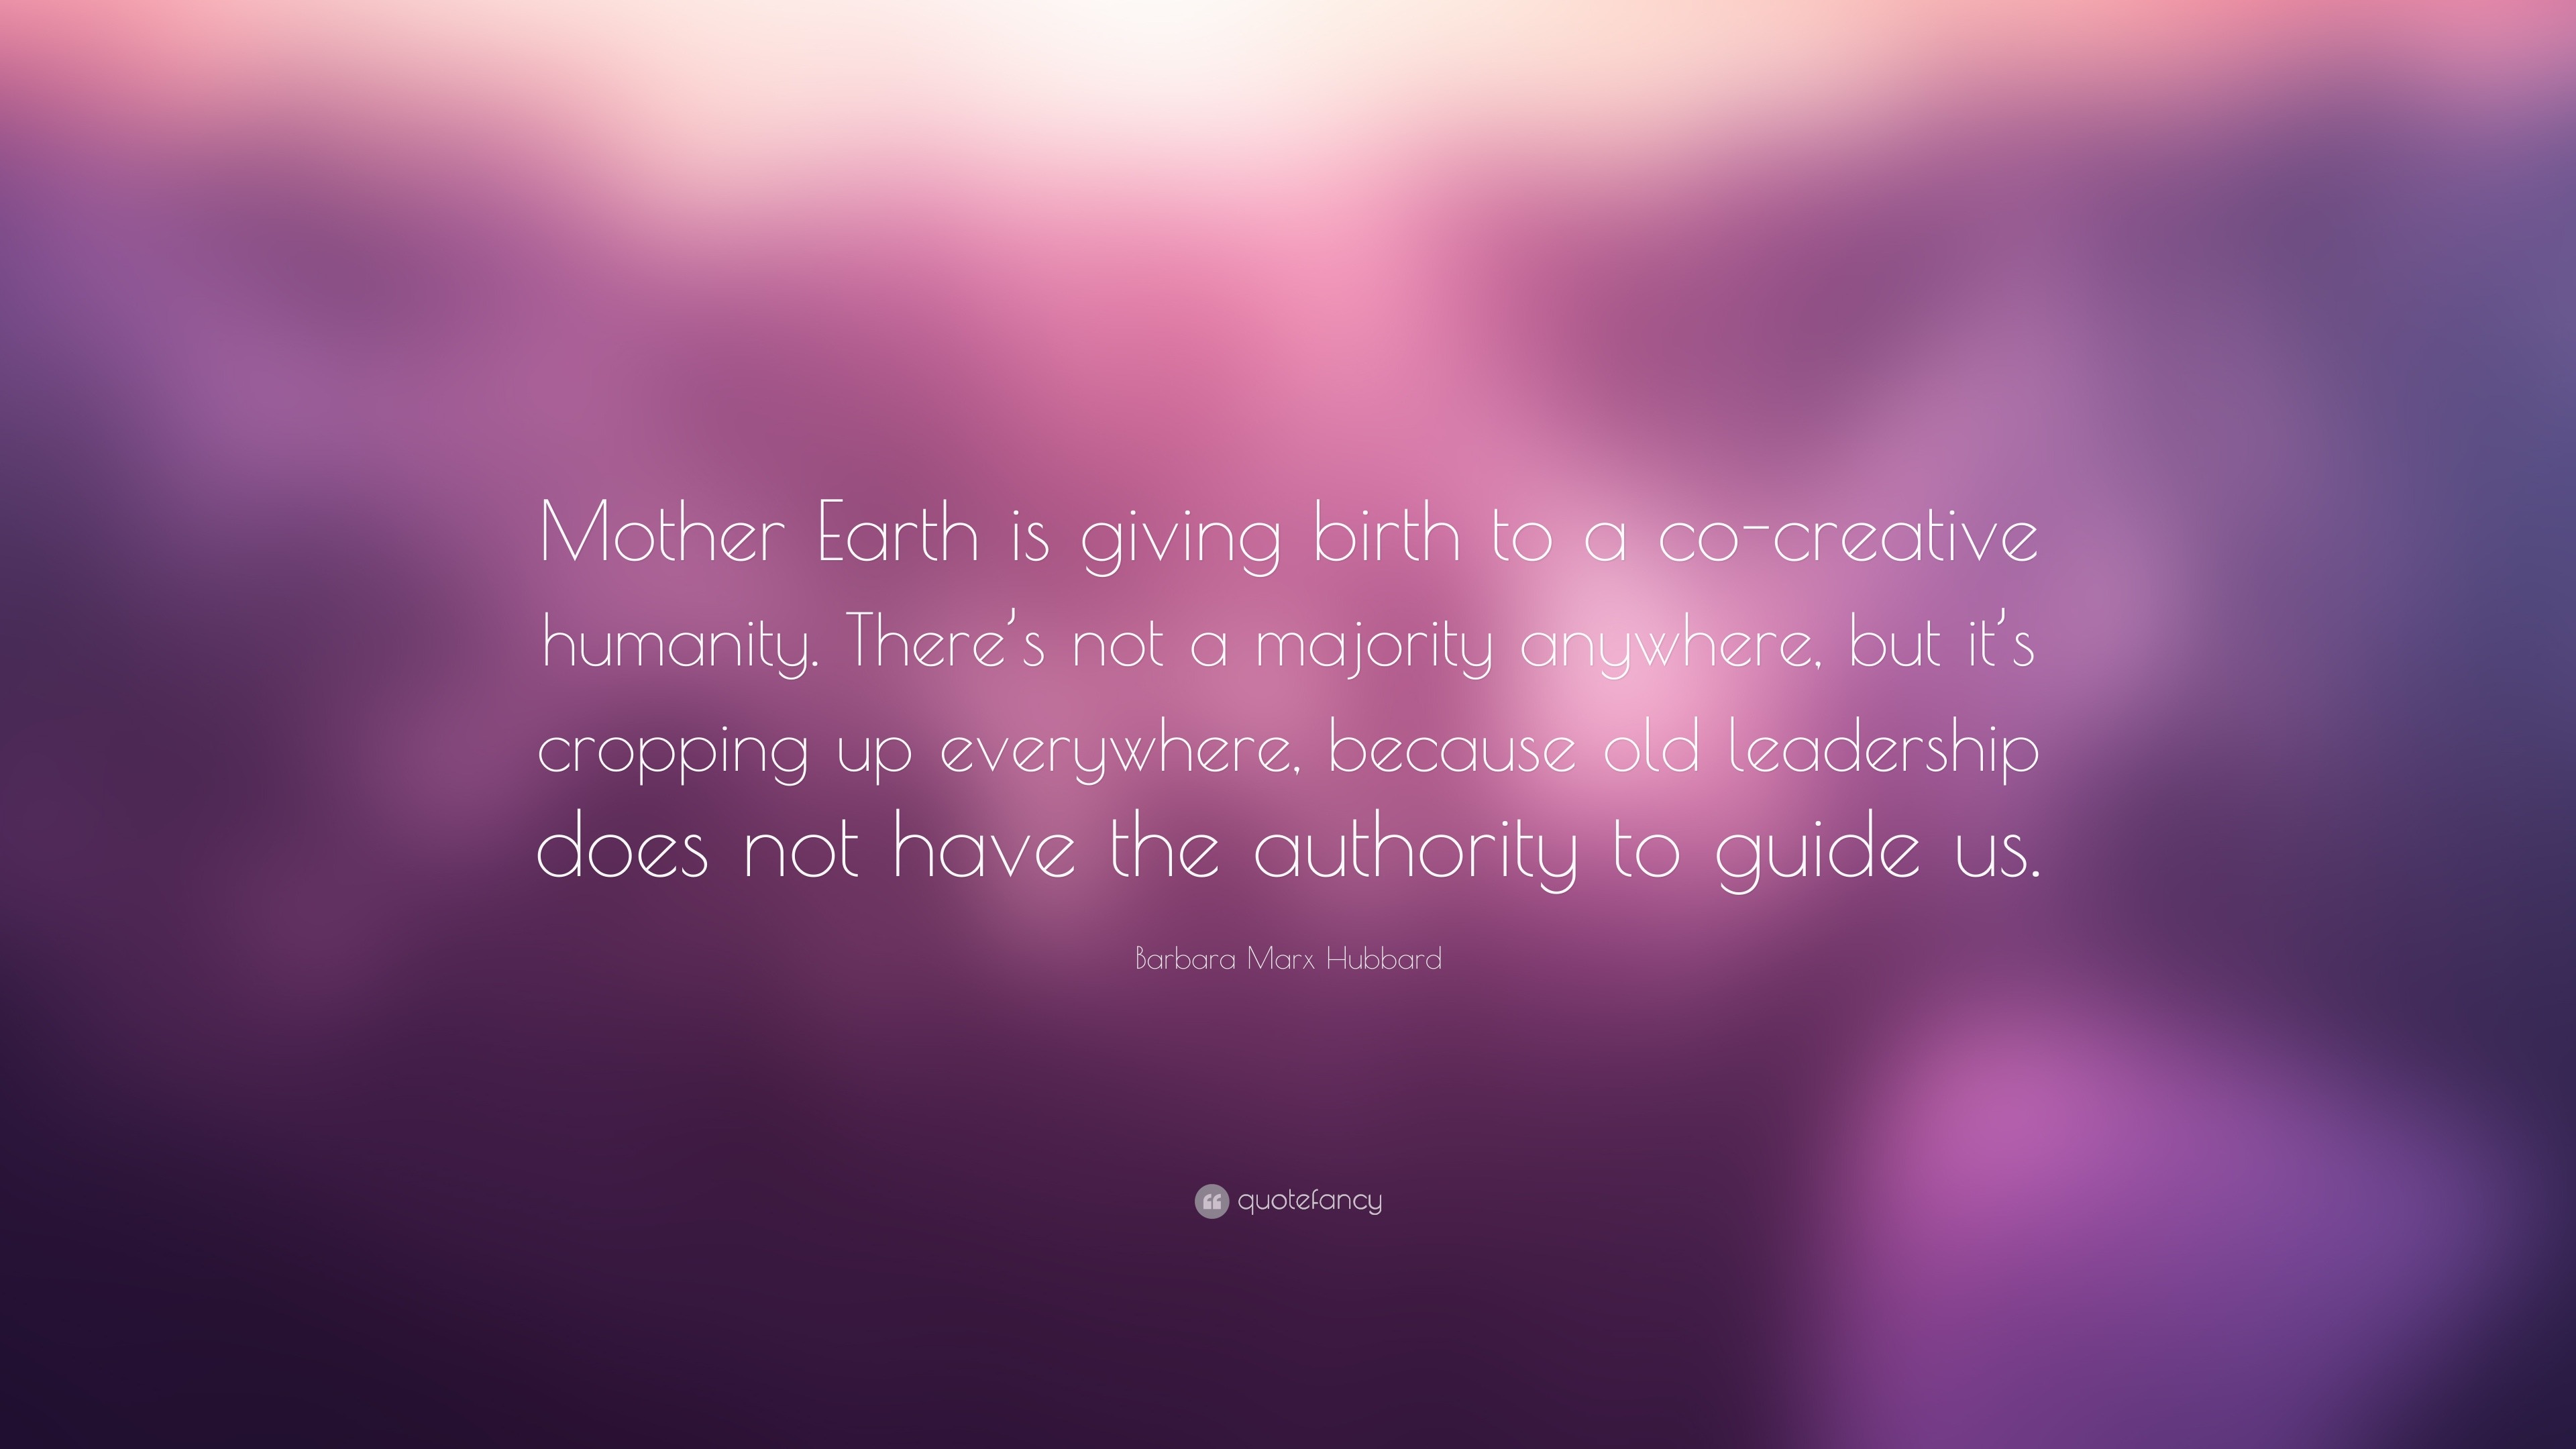 Barbara Marx Hubbard Quote: “Mother Earth is giving birth to a co ...